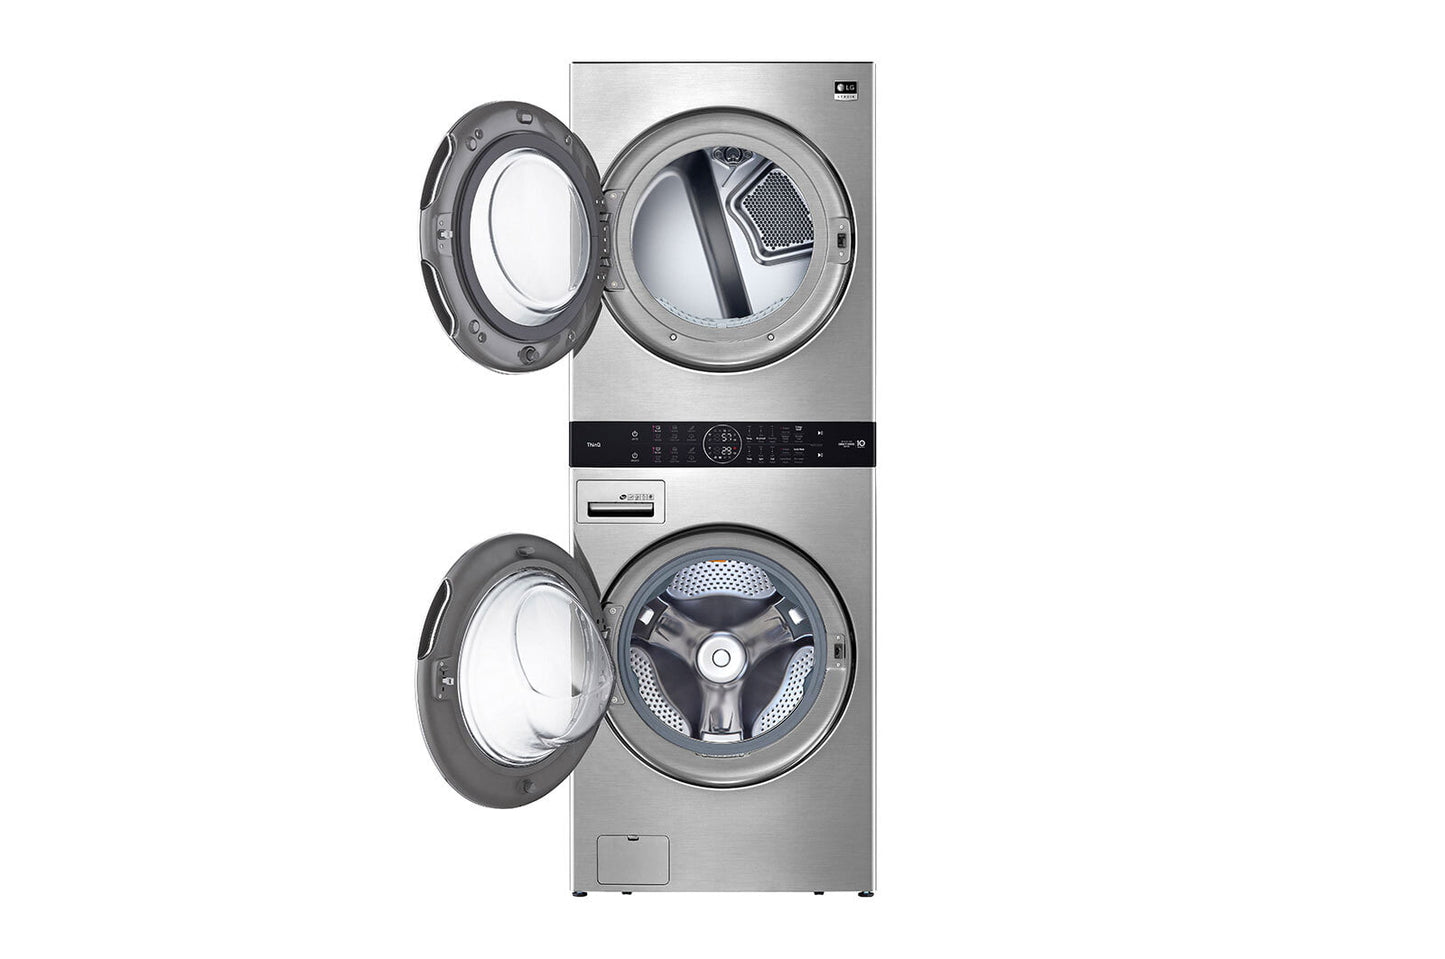 Lg WSEX200HNA Lg Studio Single Unit Front Load Washtower&#8482; With Center Control&#8482; 5.0 Cu. Ft. Washer And 7.4 Cu. Ft. Electric Dryer